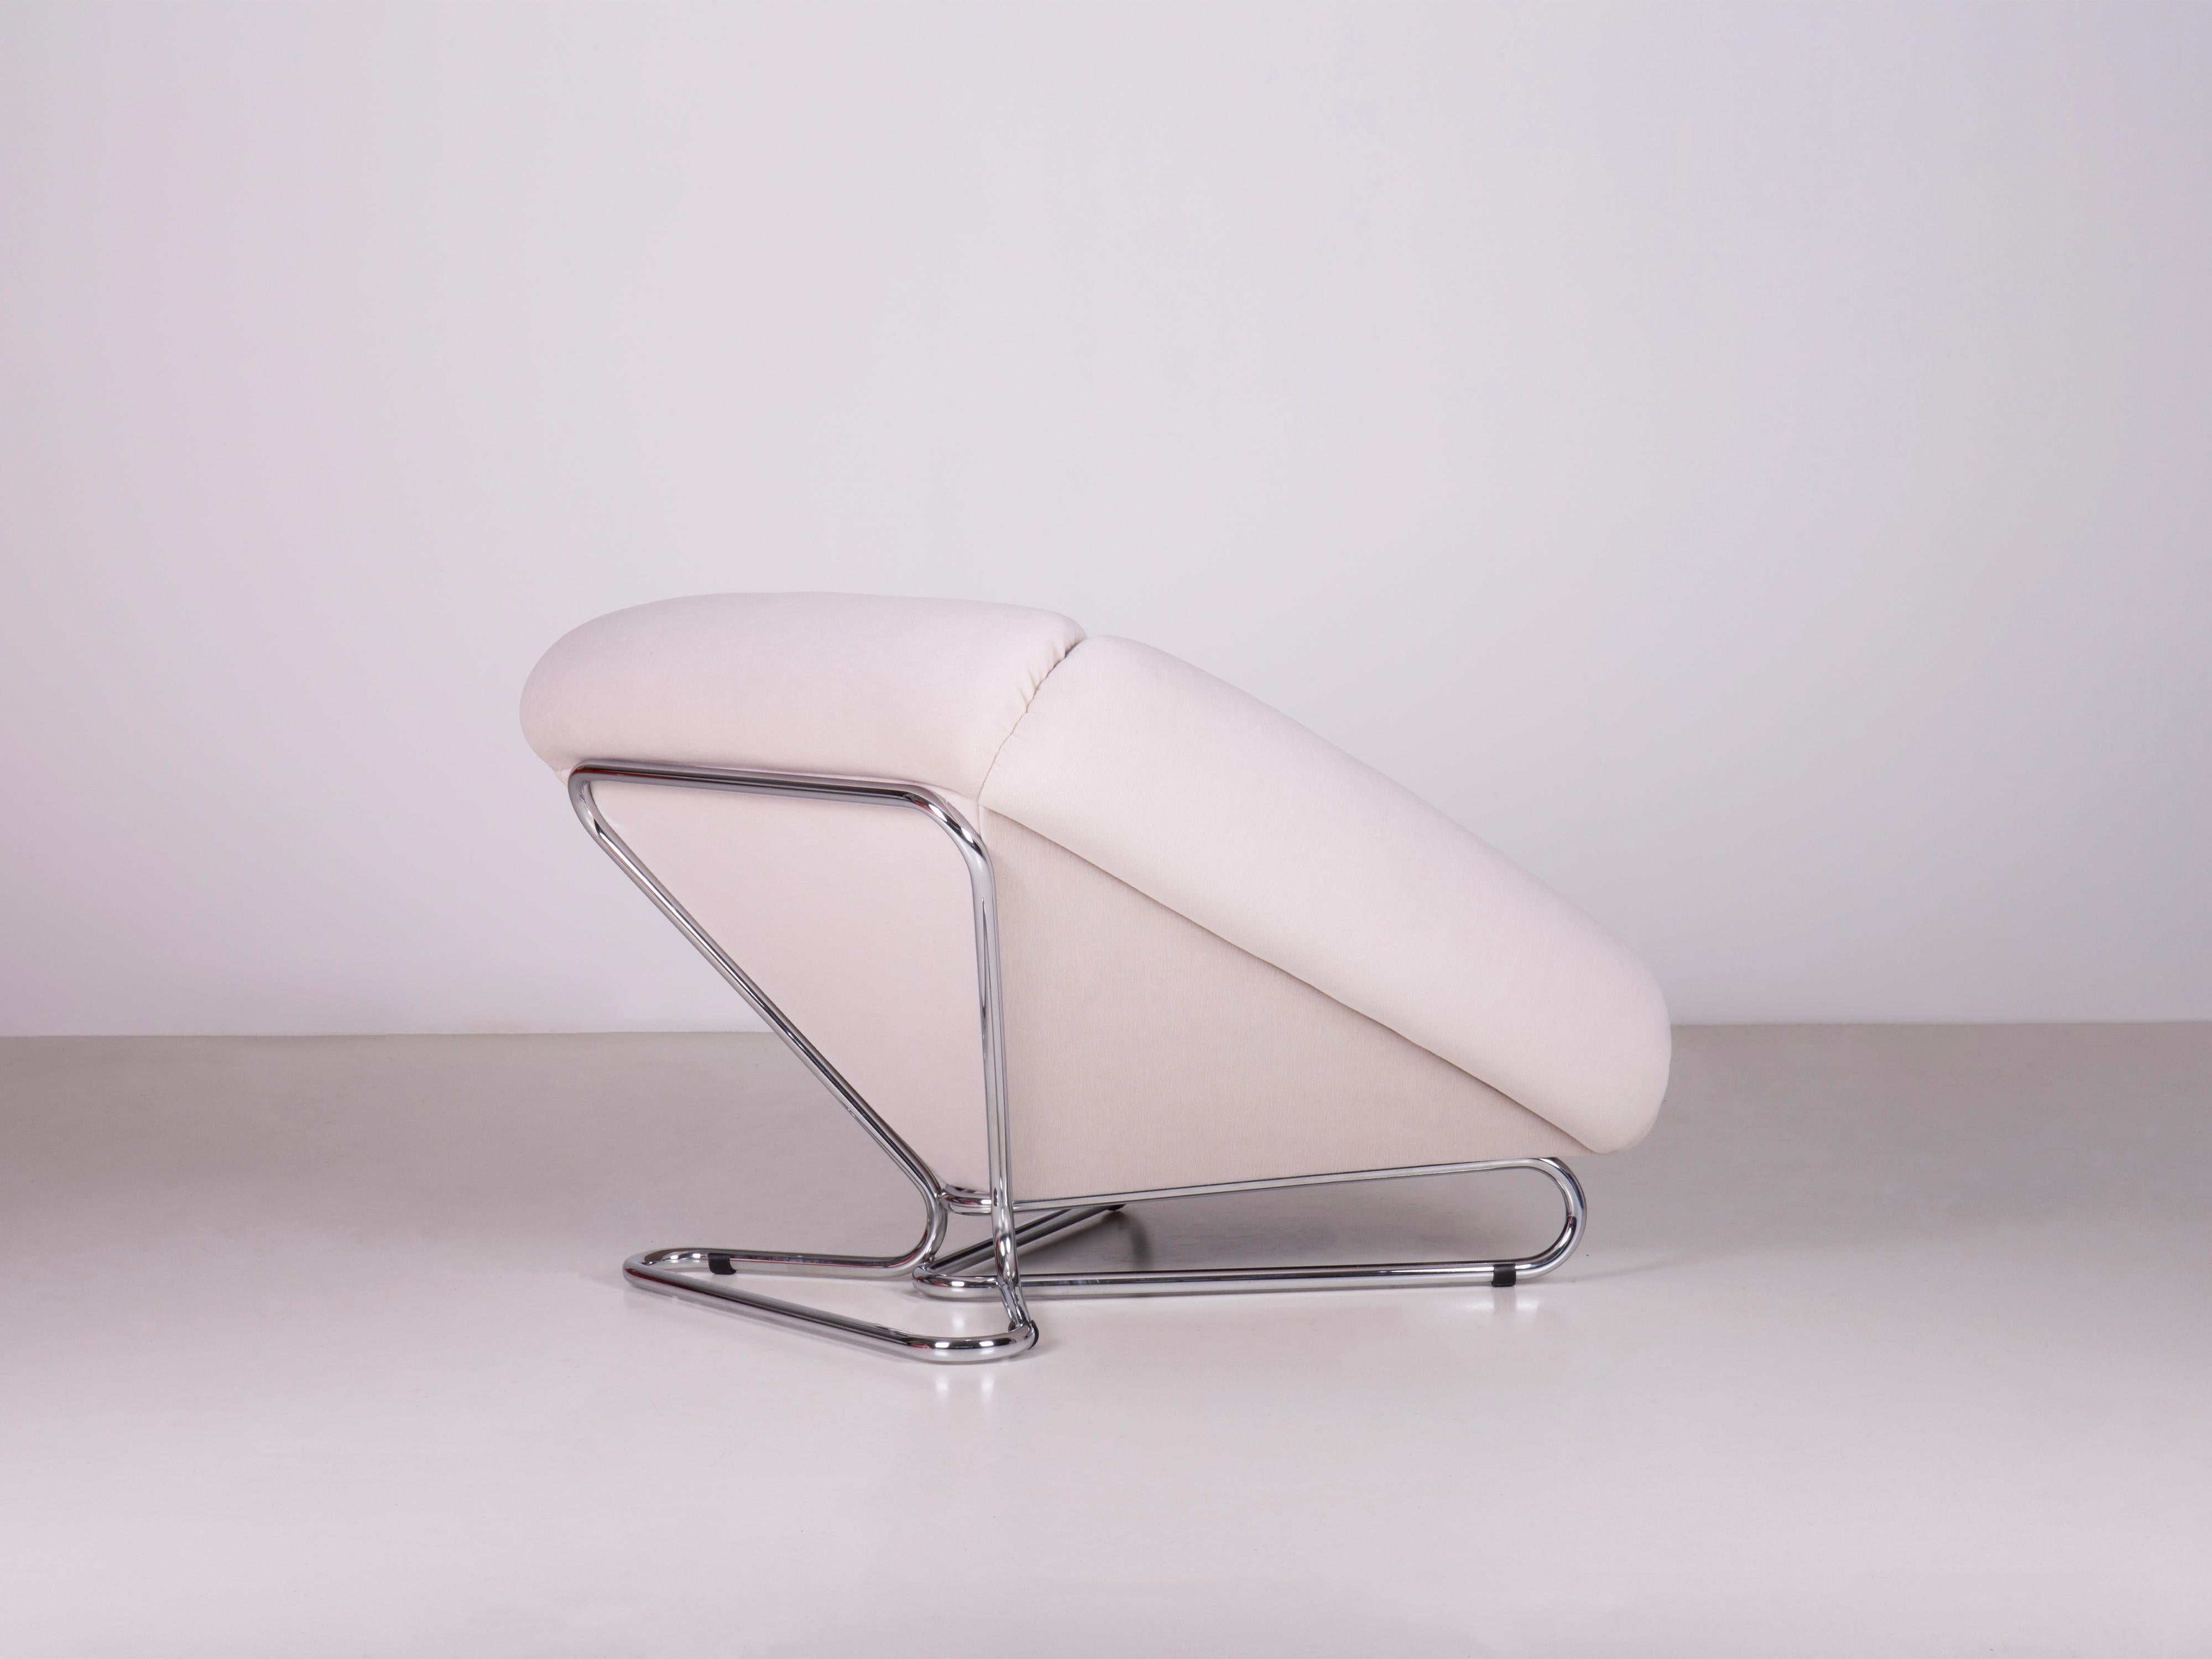 Steel Prisma Armchair by Augusto Betti Kvadrat Gentle Fabric Paradisoterrestre Edition For Sale